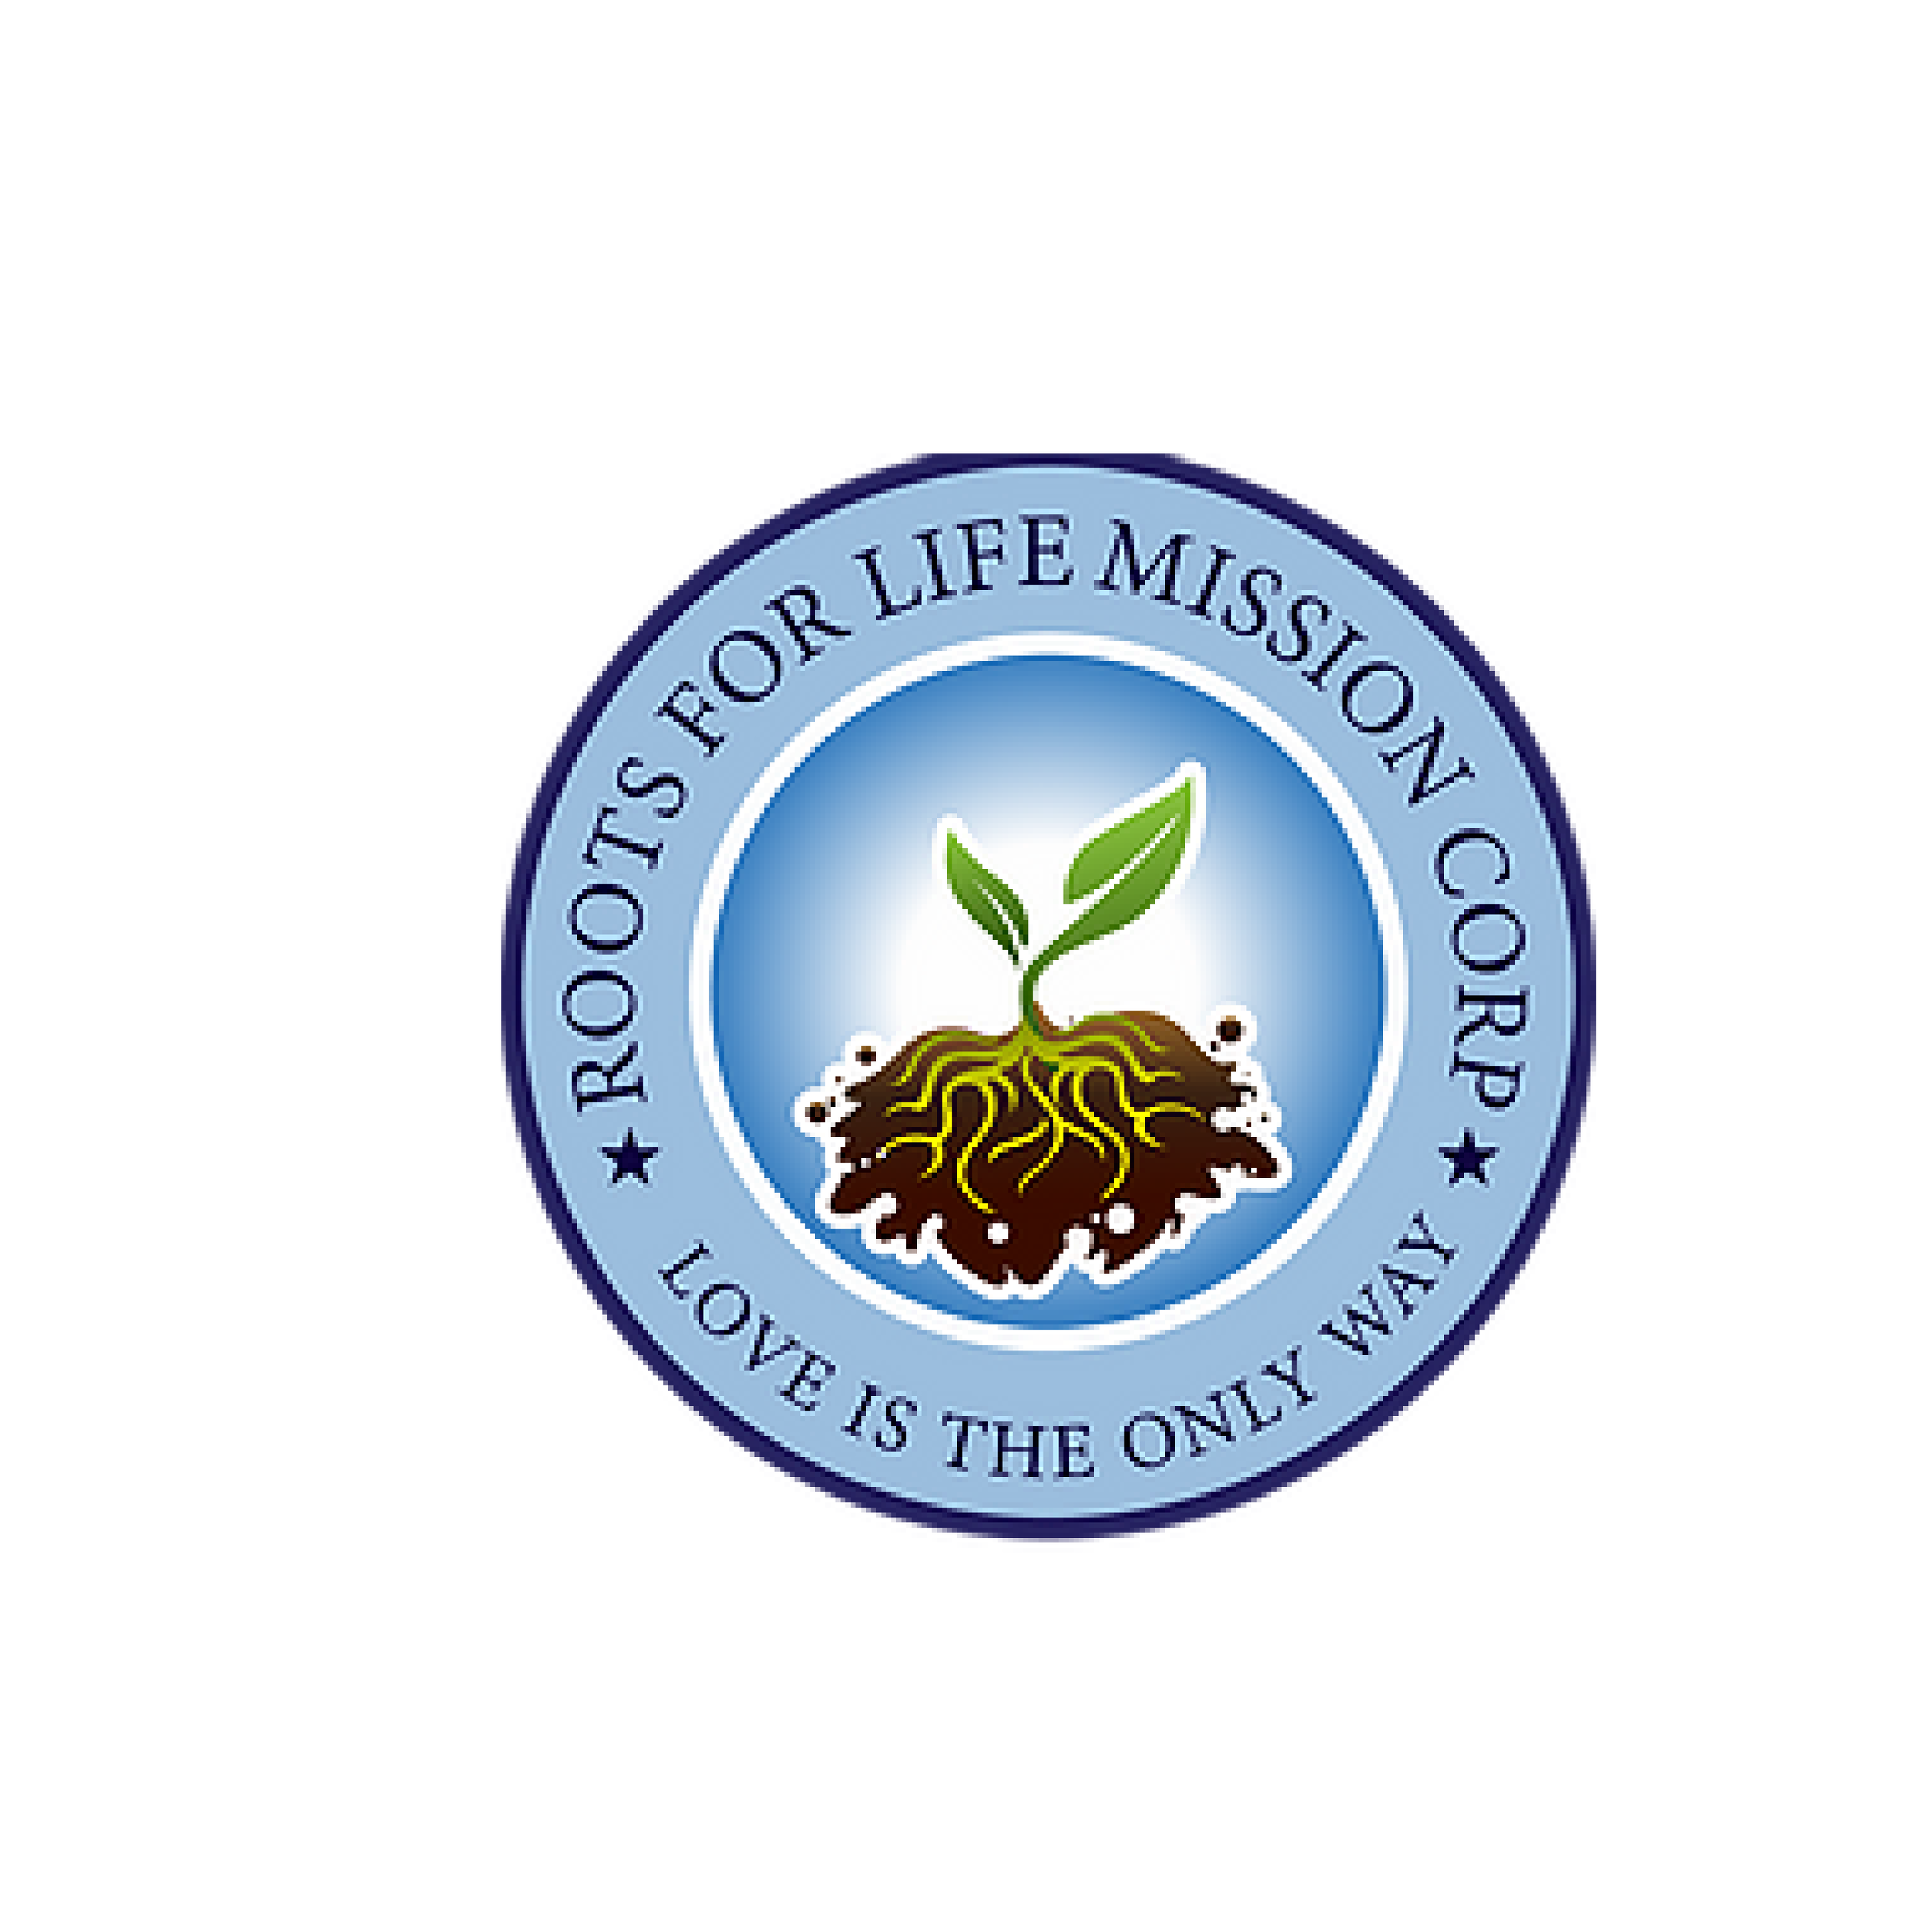 Roots for Life Mission Corp